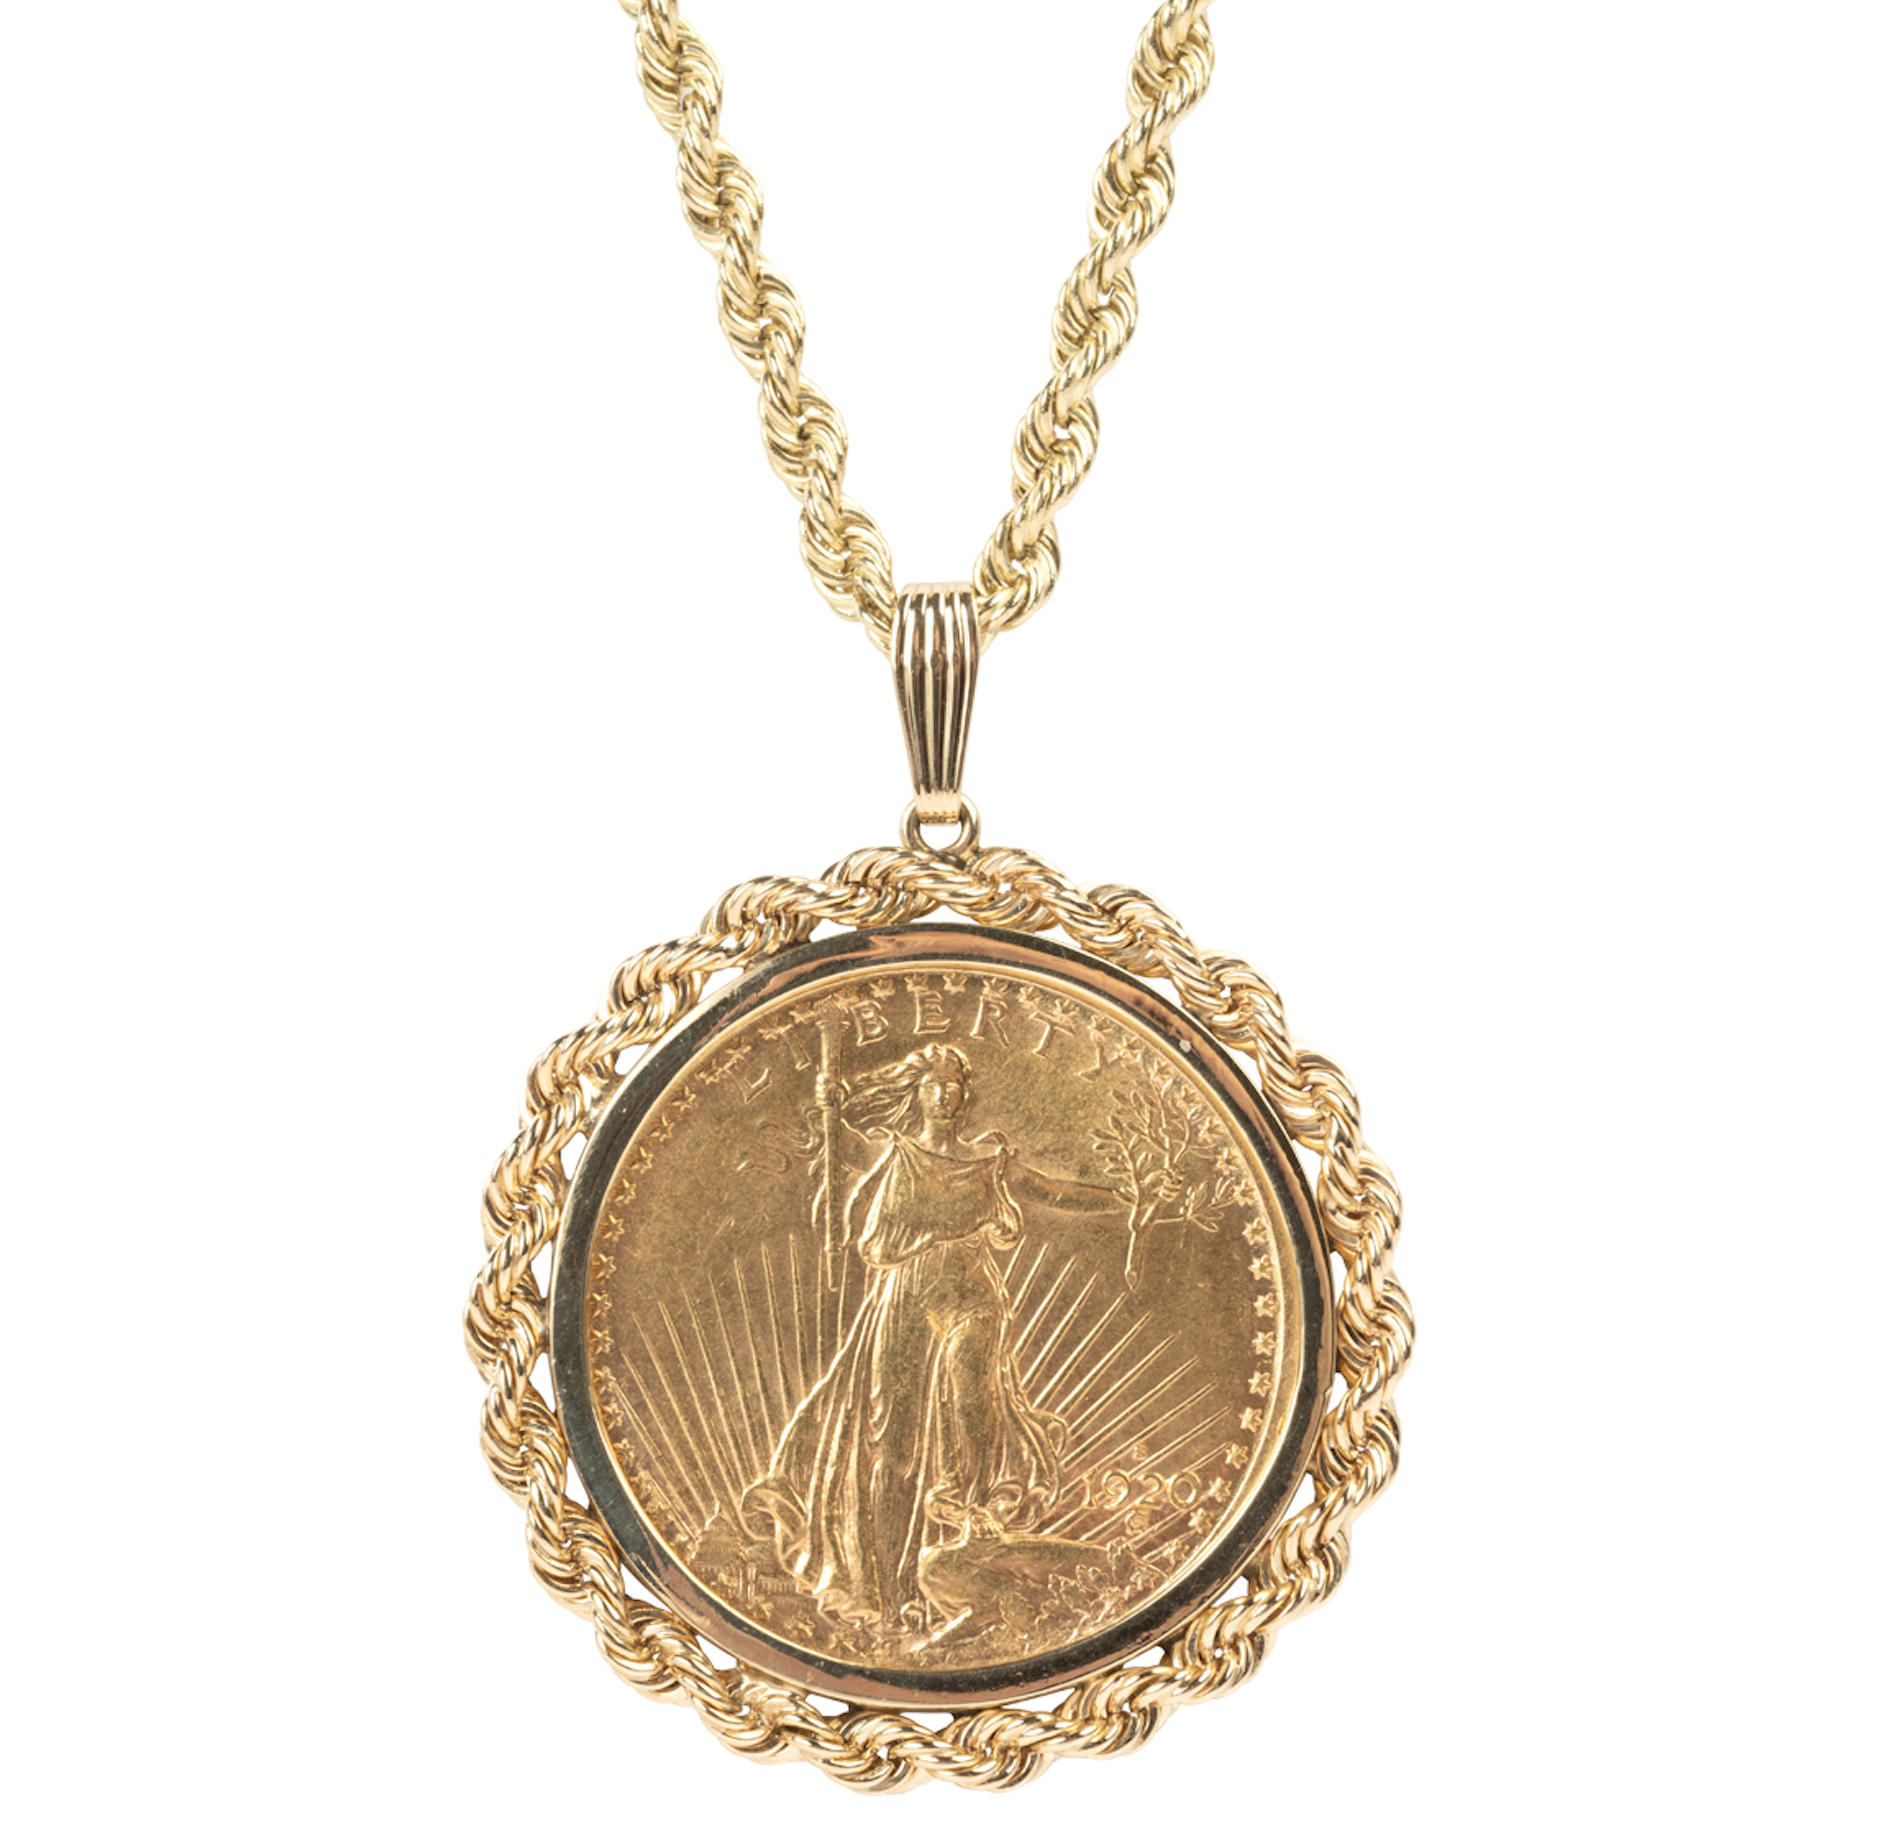 Necklace showcasing a 1920-S Double Eagle coin, $30,750